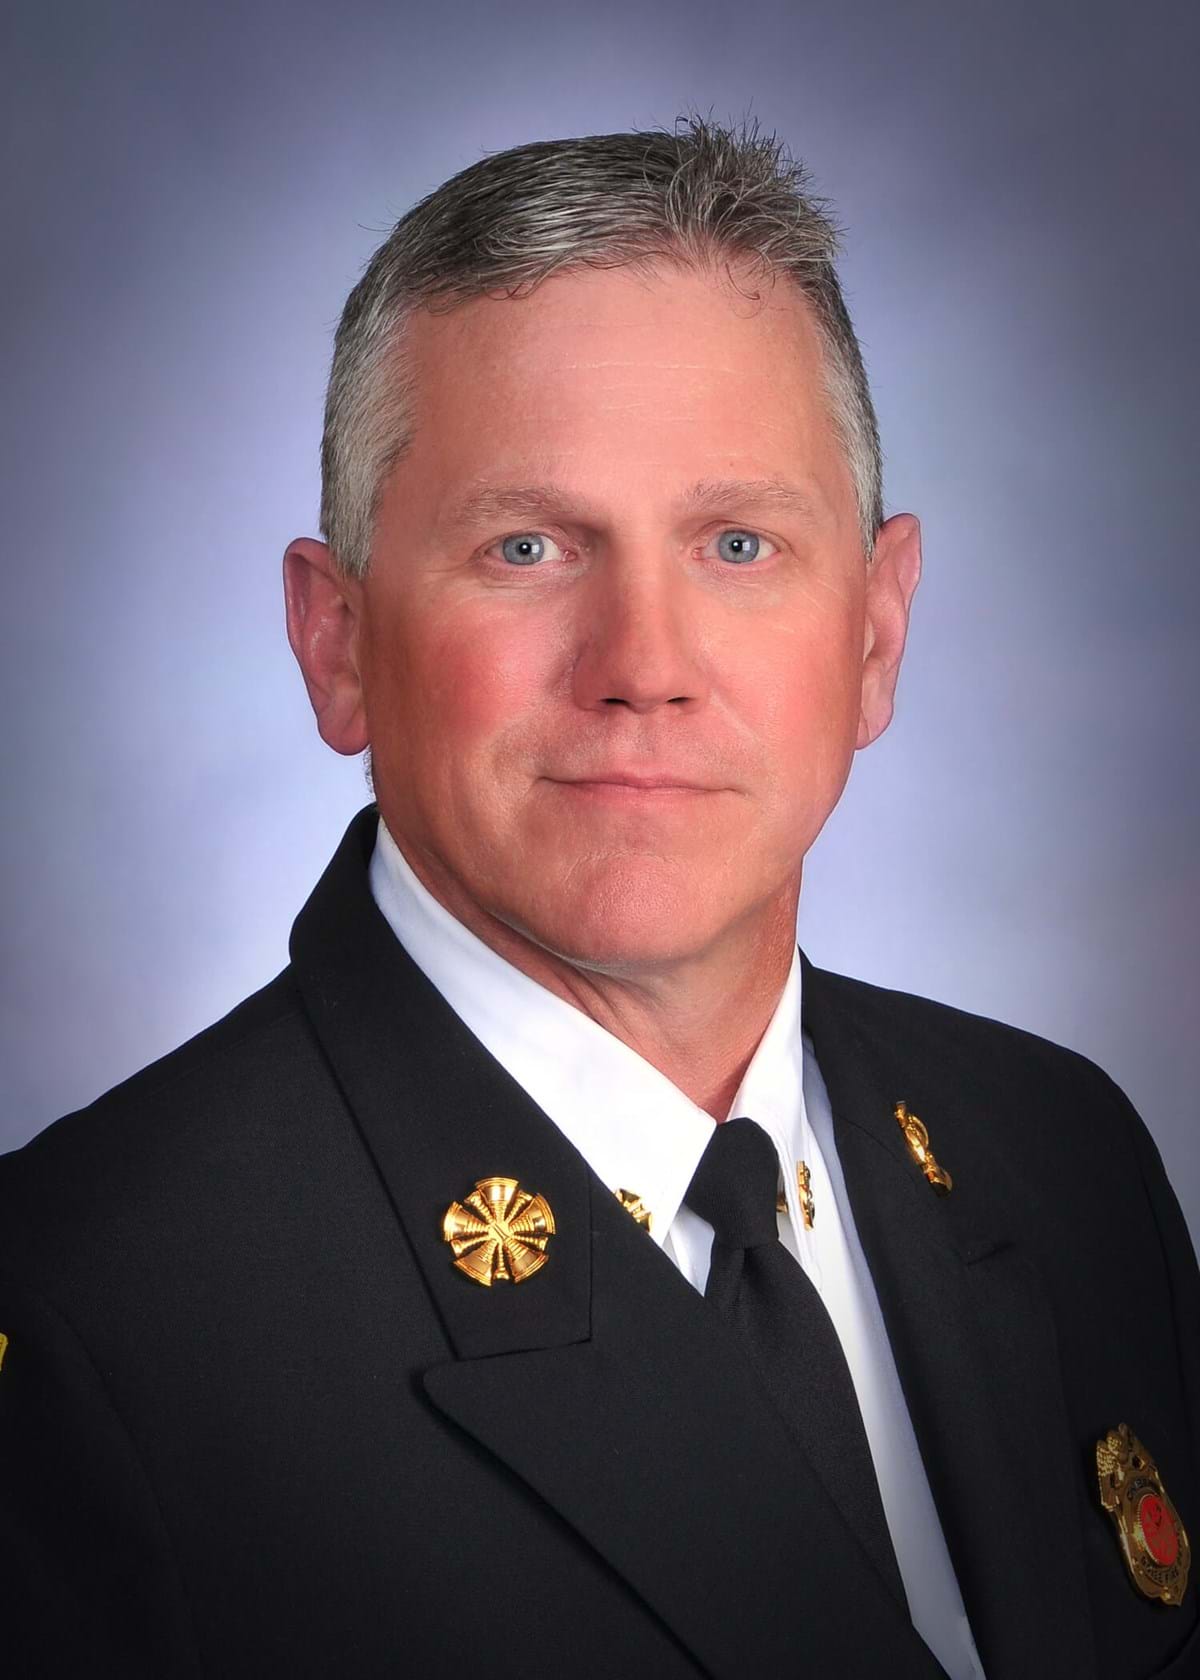 Chief Niemeyer, man with short gray hair and fire chief uniform